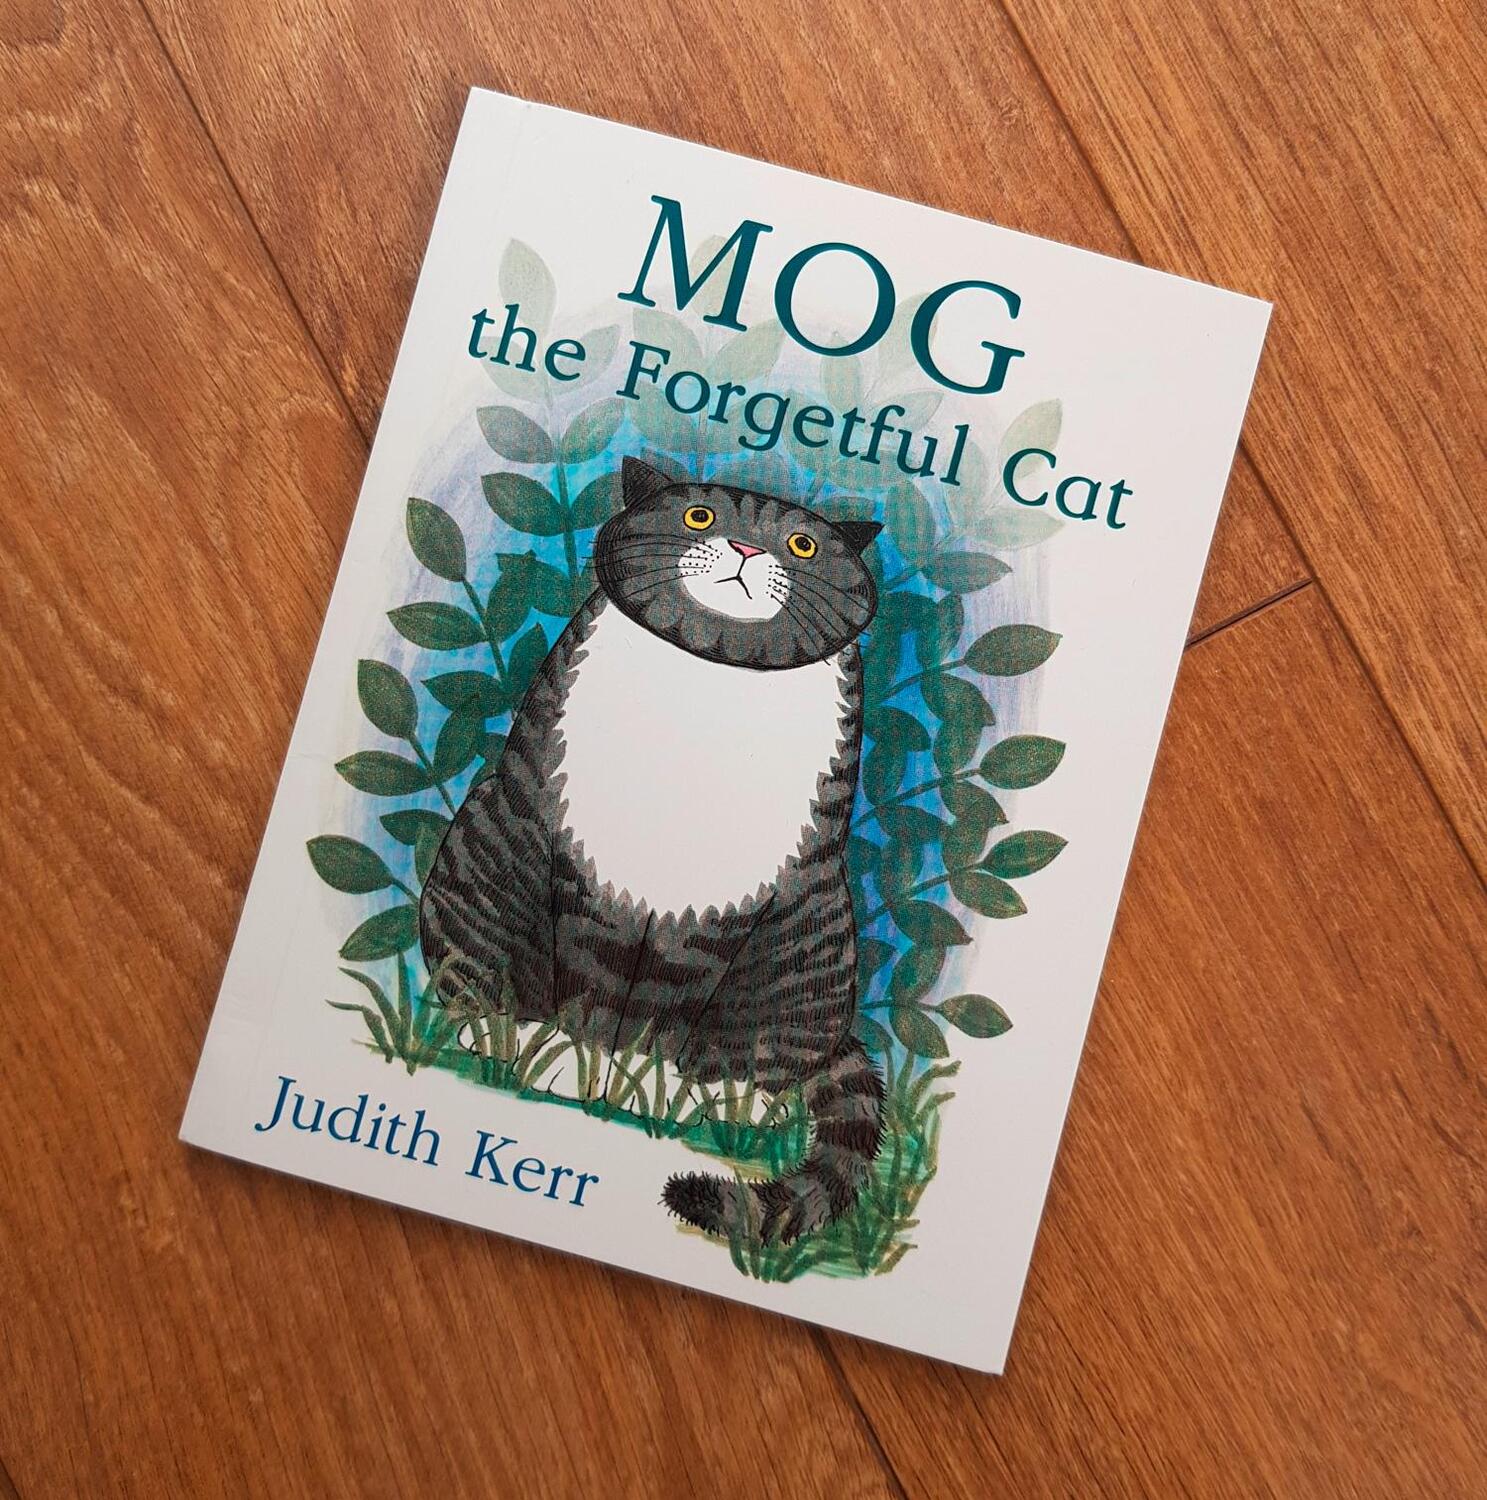 Bild: 9780008262143 | Mog the Forgetful Cat Book and Toy Gift Set | Judith Kerr | Box | 2017